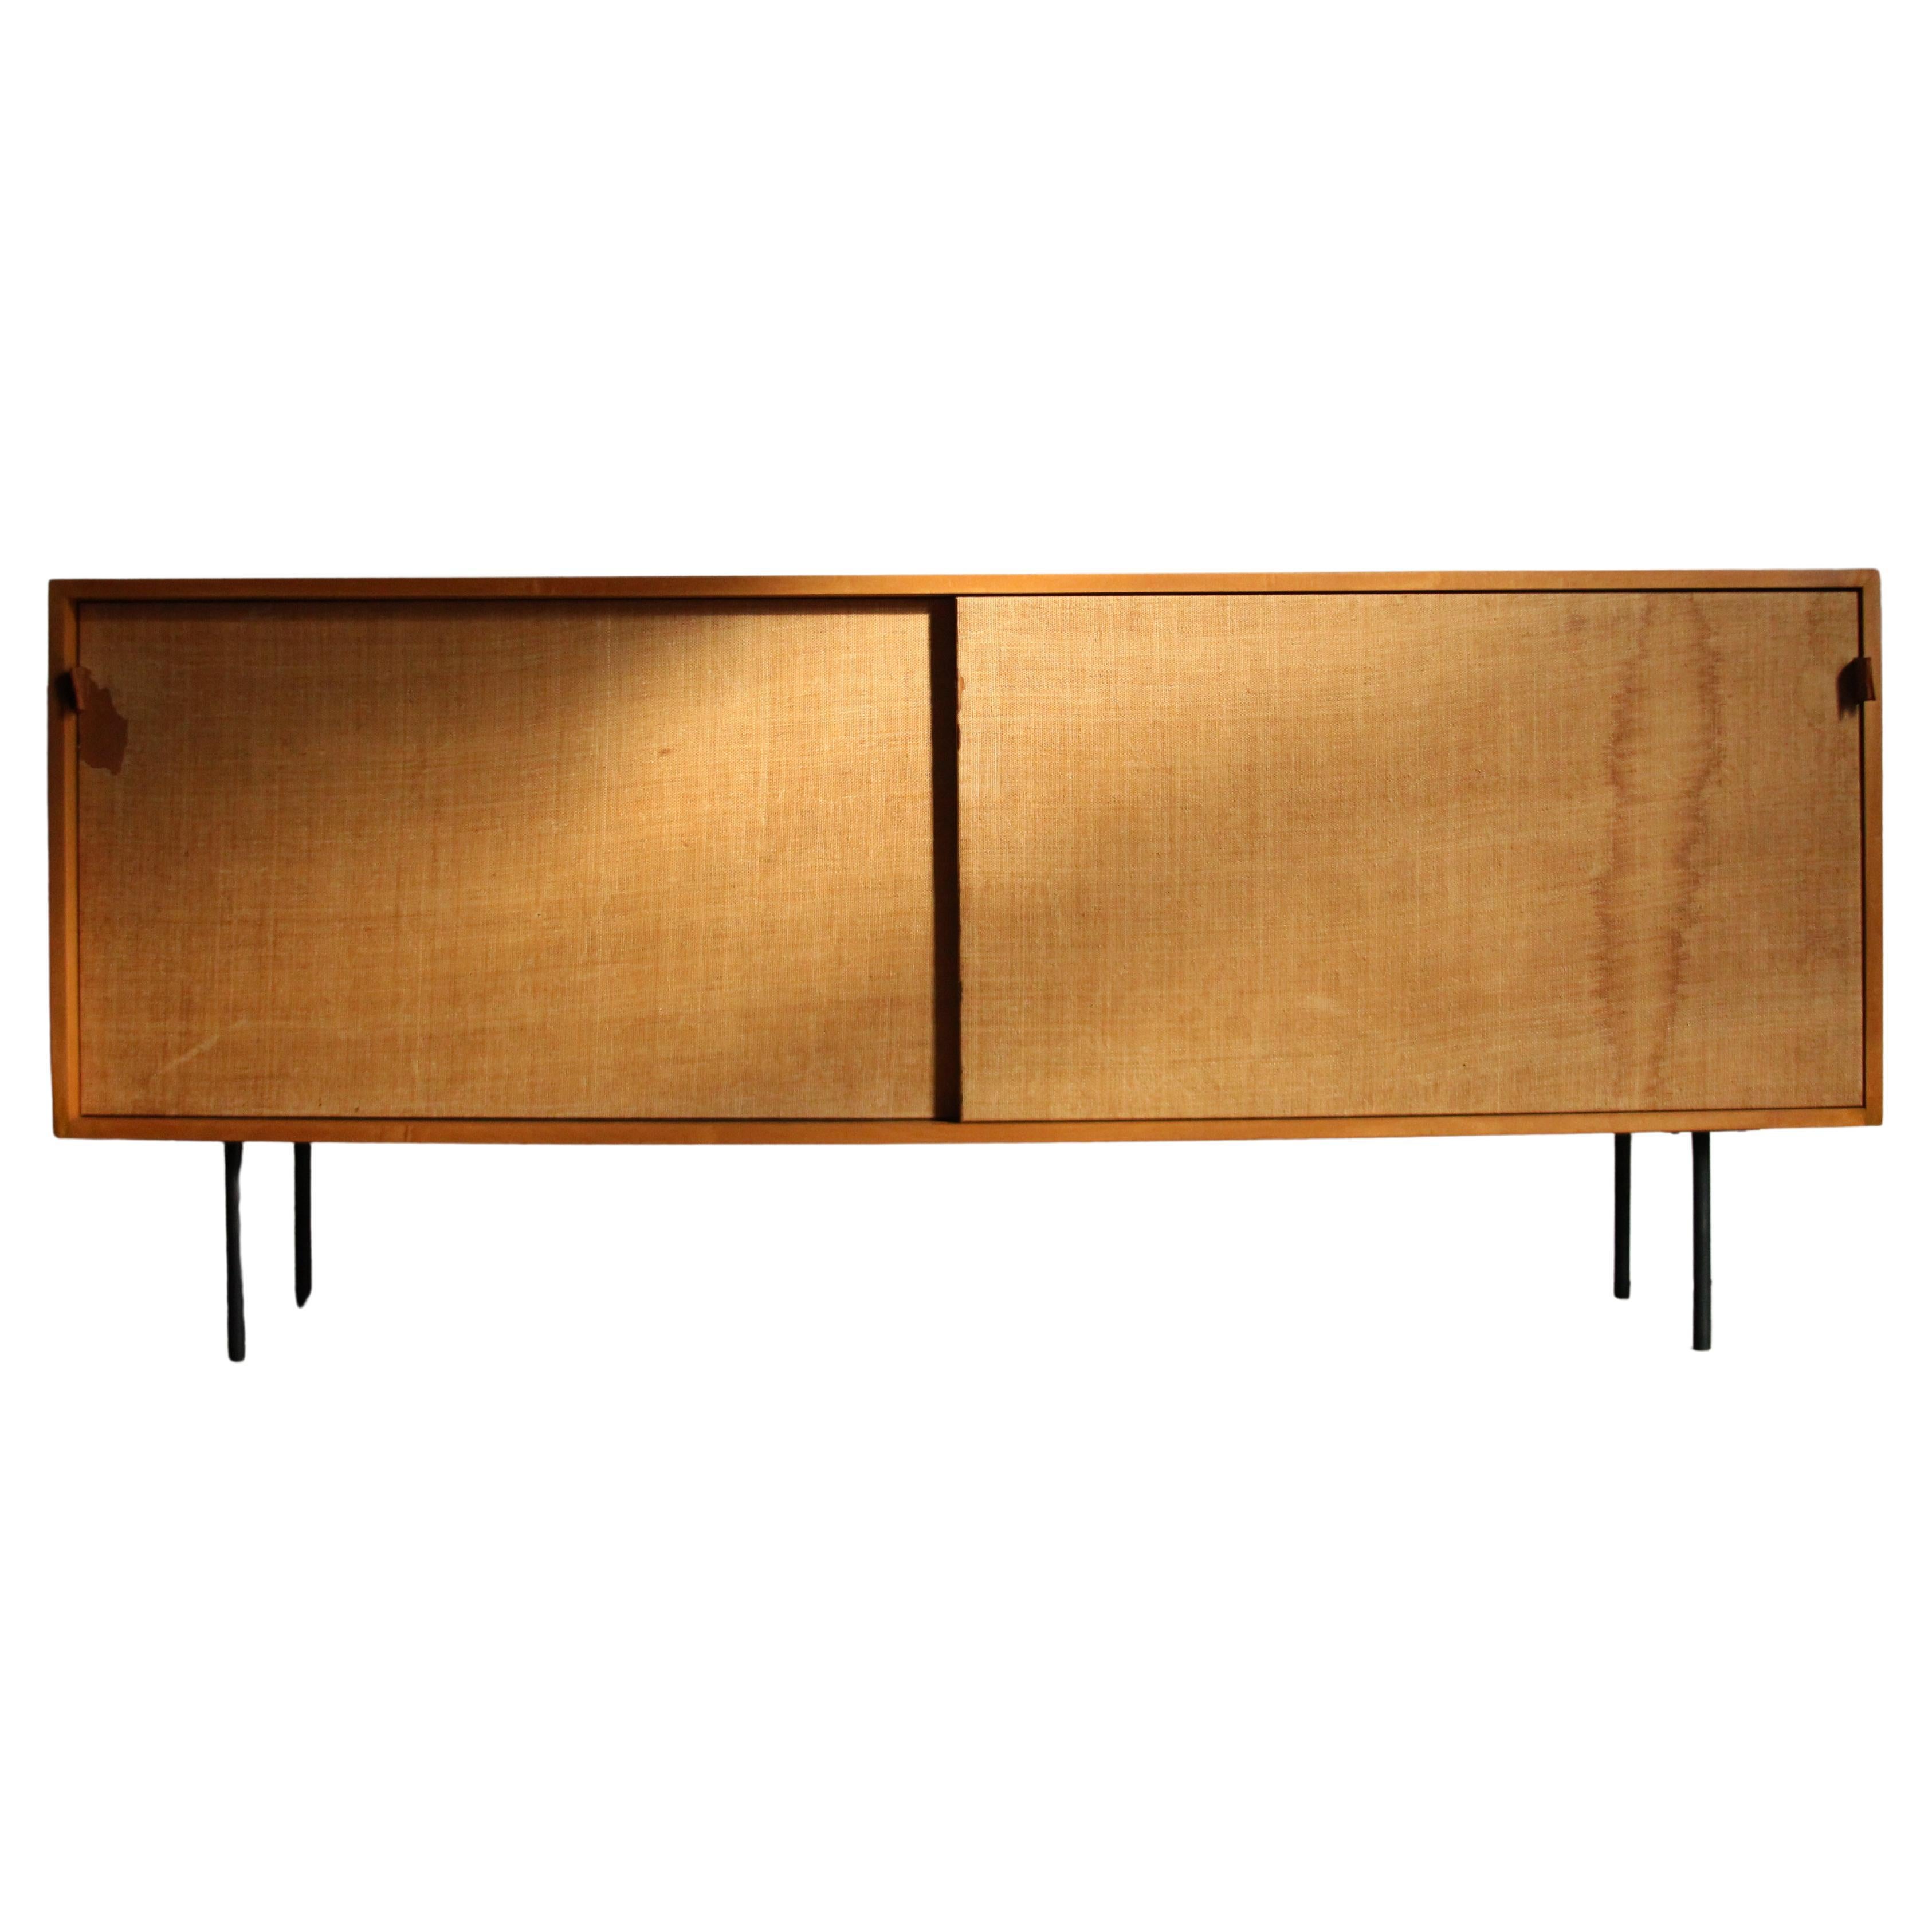 Florence Knoll 'Model 116' Iron Leg and Grass Cloth Credenza for Knoll, 1950s